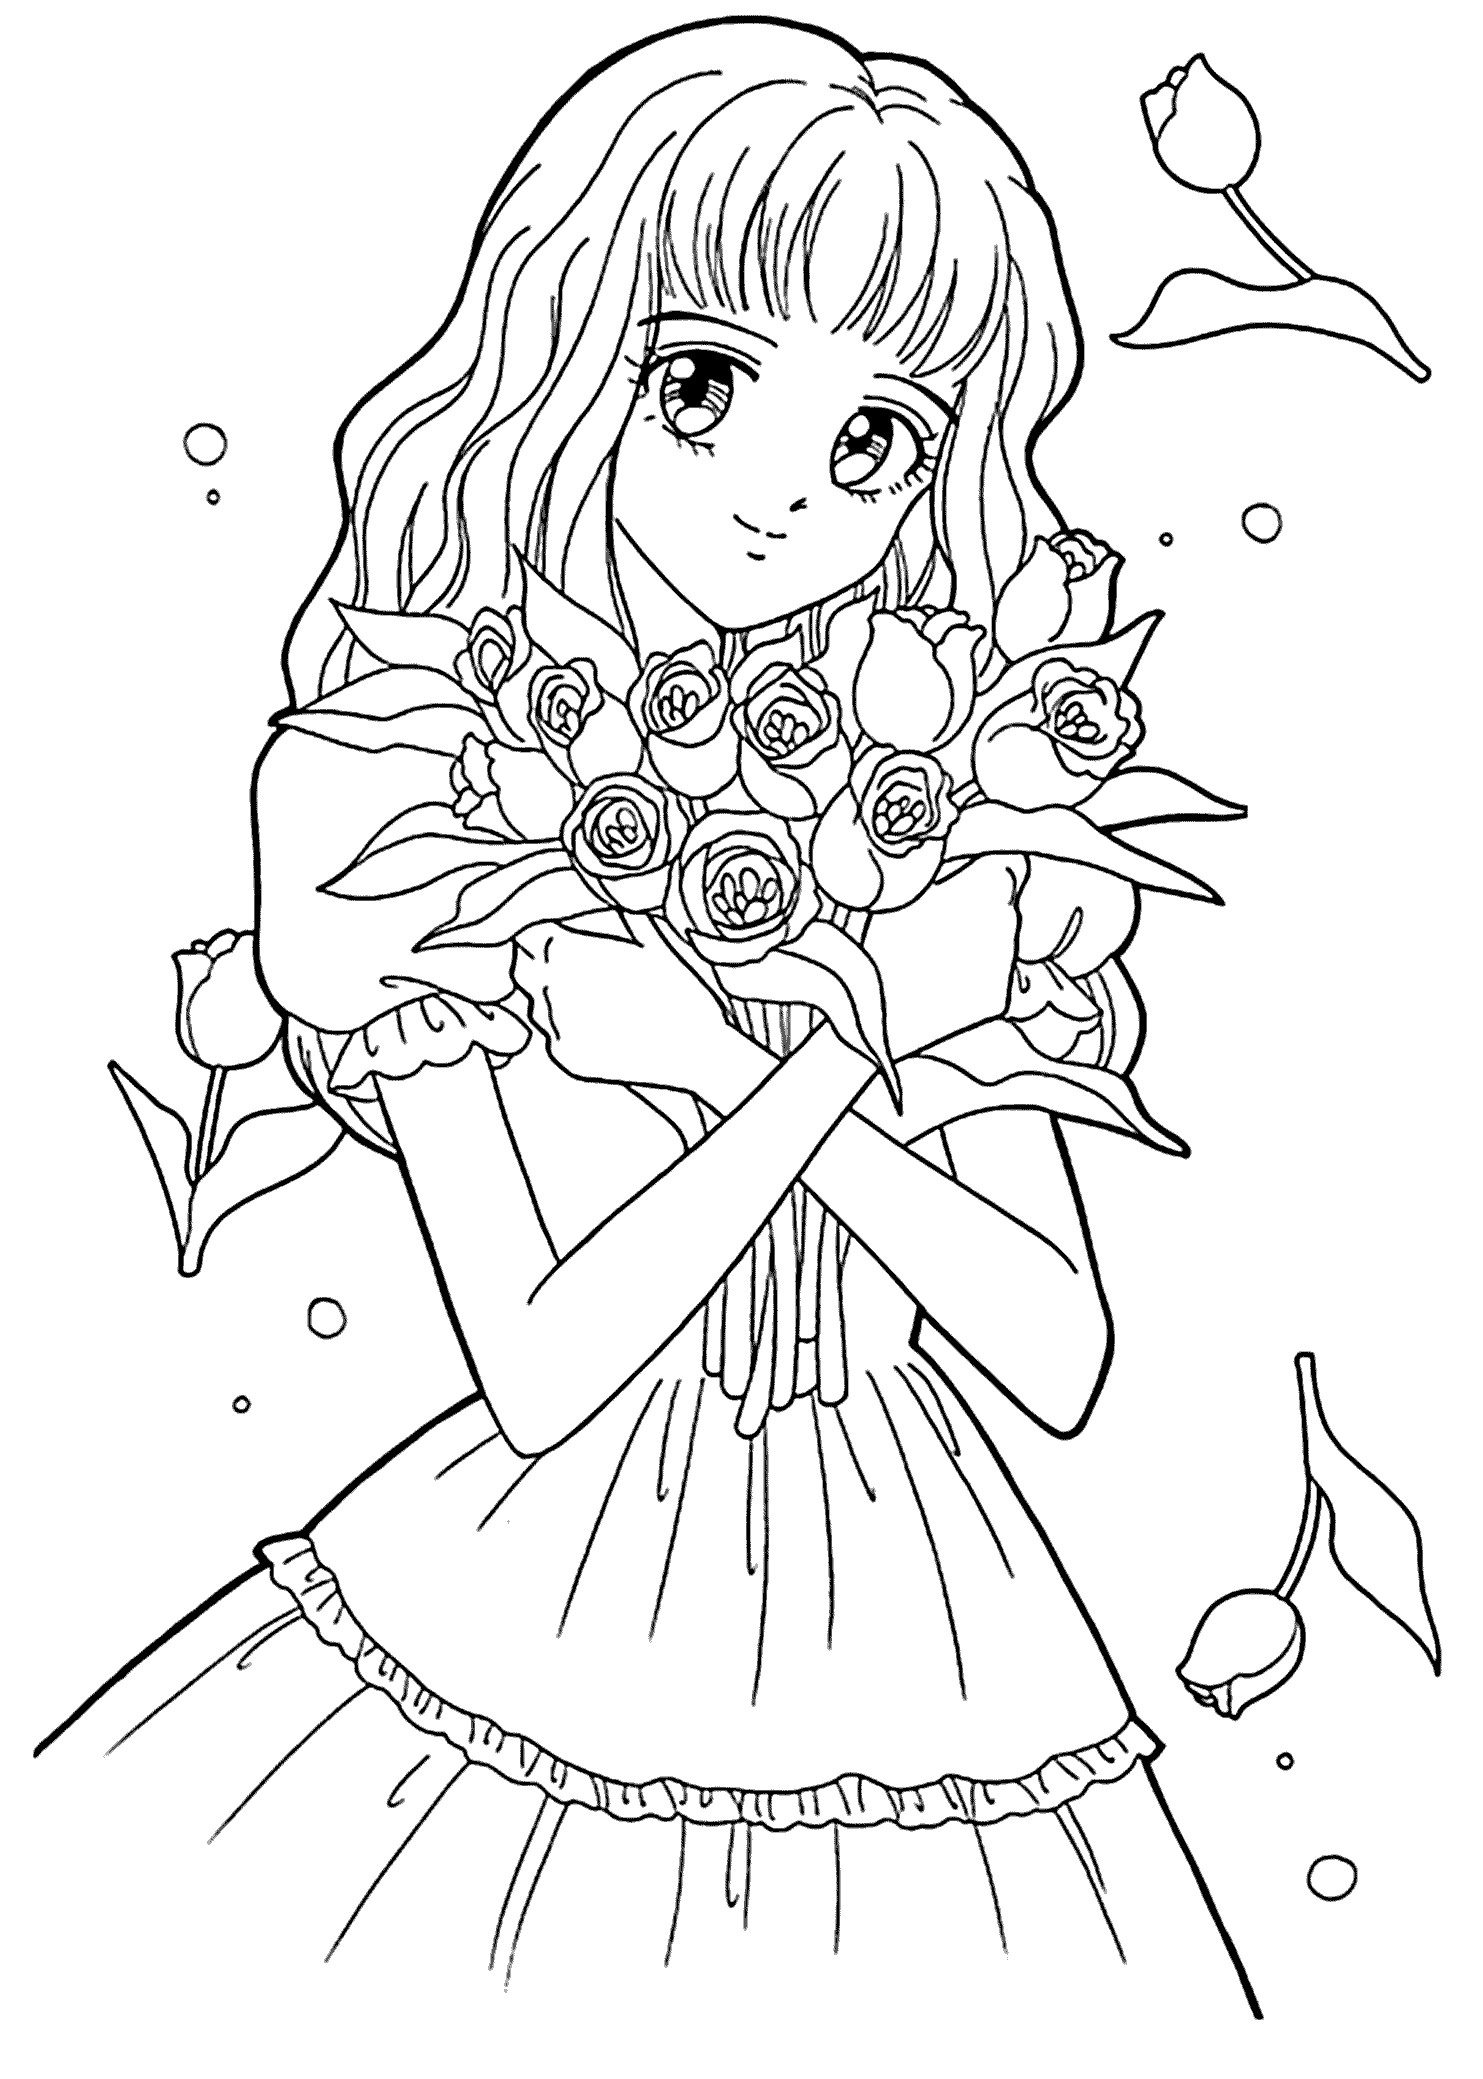 Fun Coloring Pages For Girls
 Best Free Printable Coloring Pages for Kids and Teens